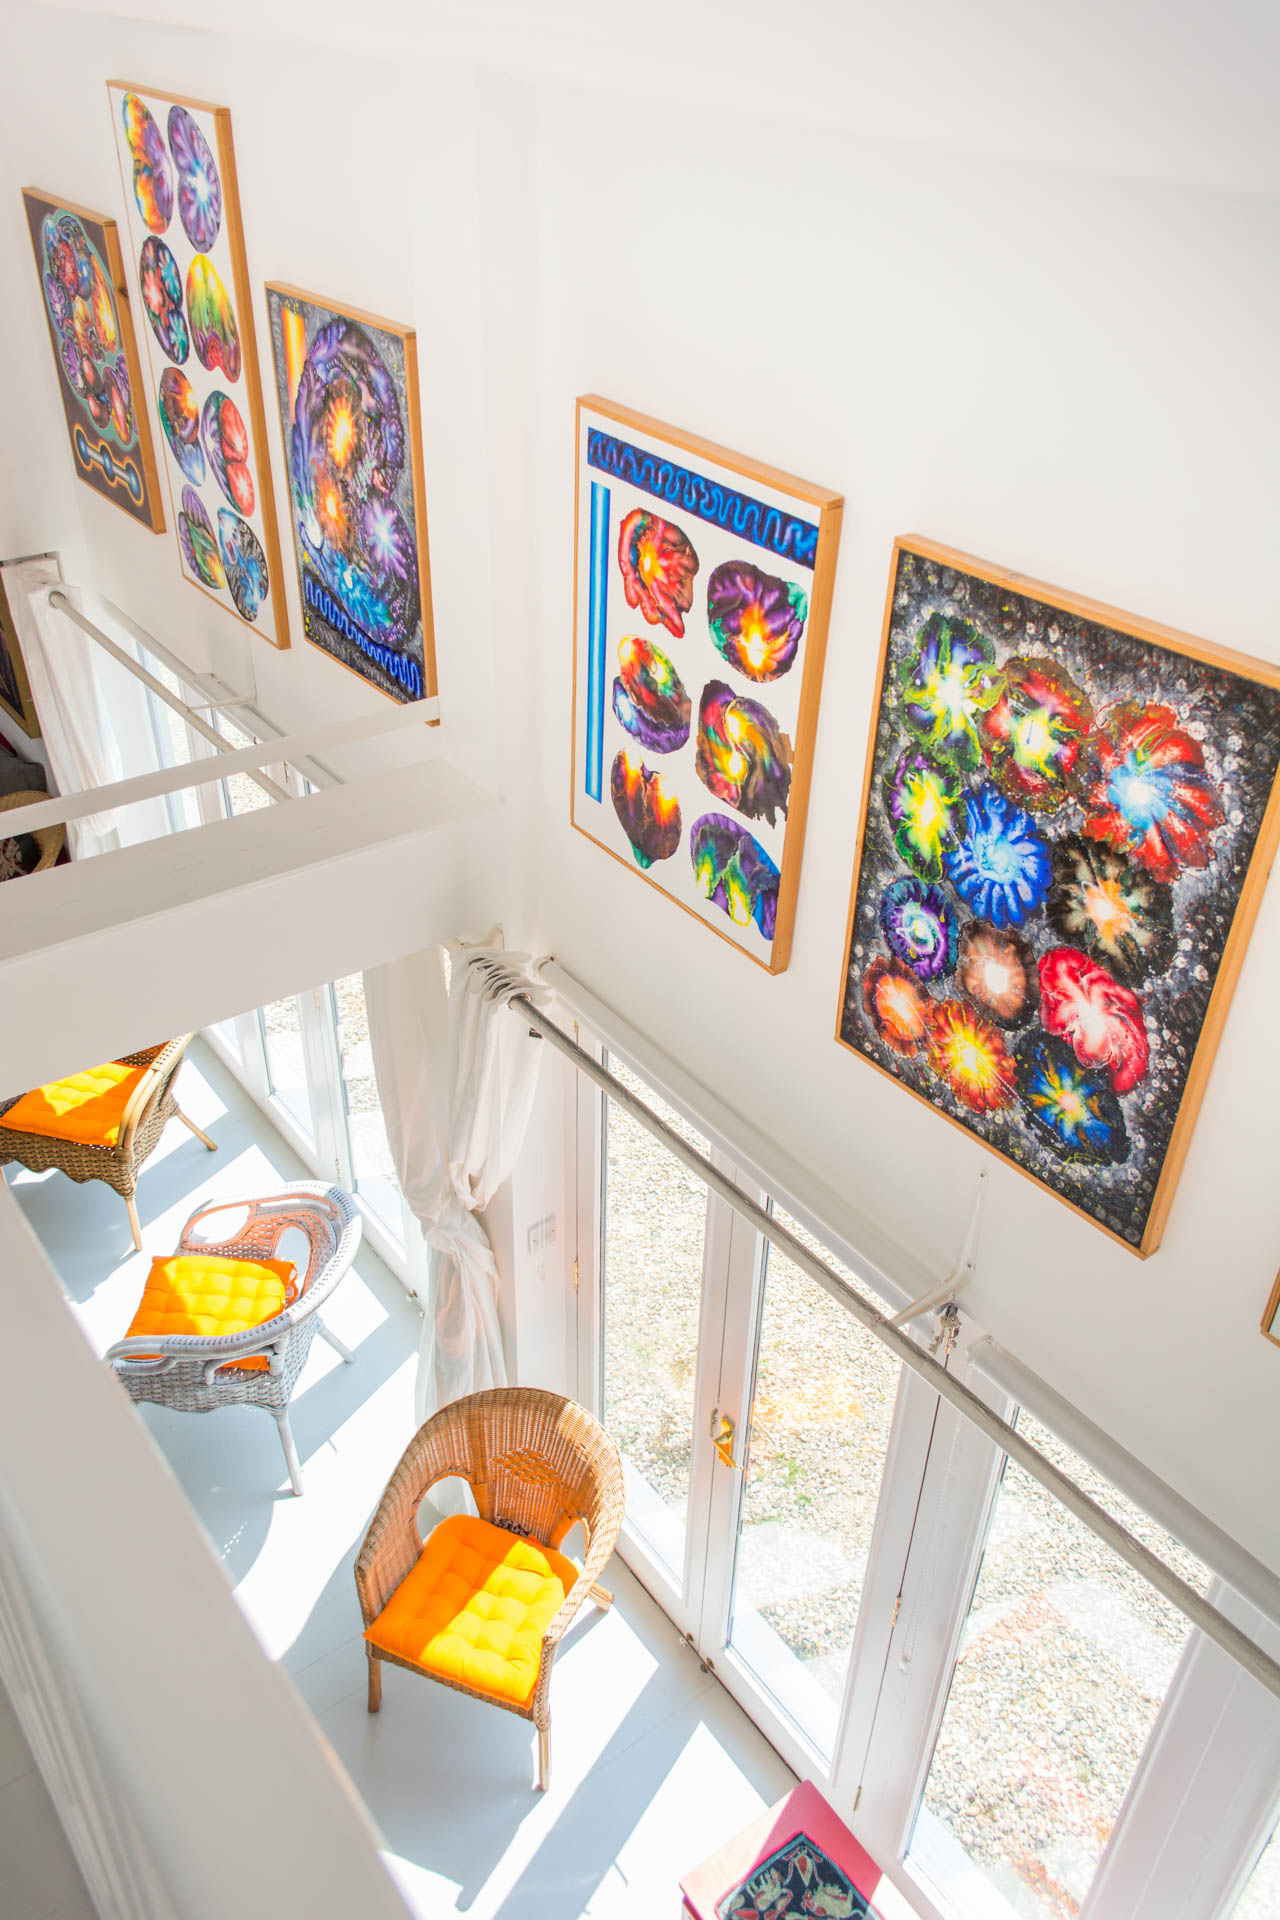 Colourful artwork on the walls placed between the ground and mezzanine floor.